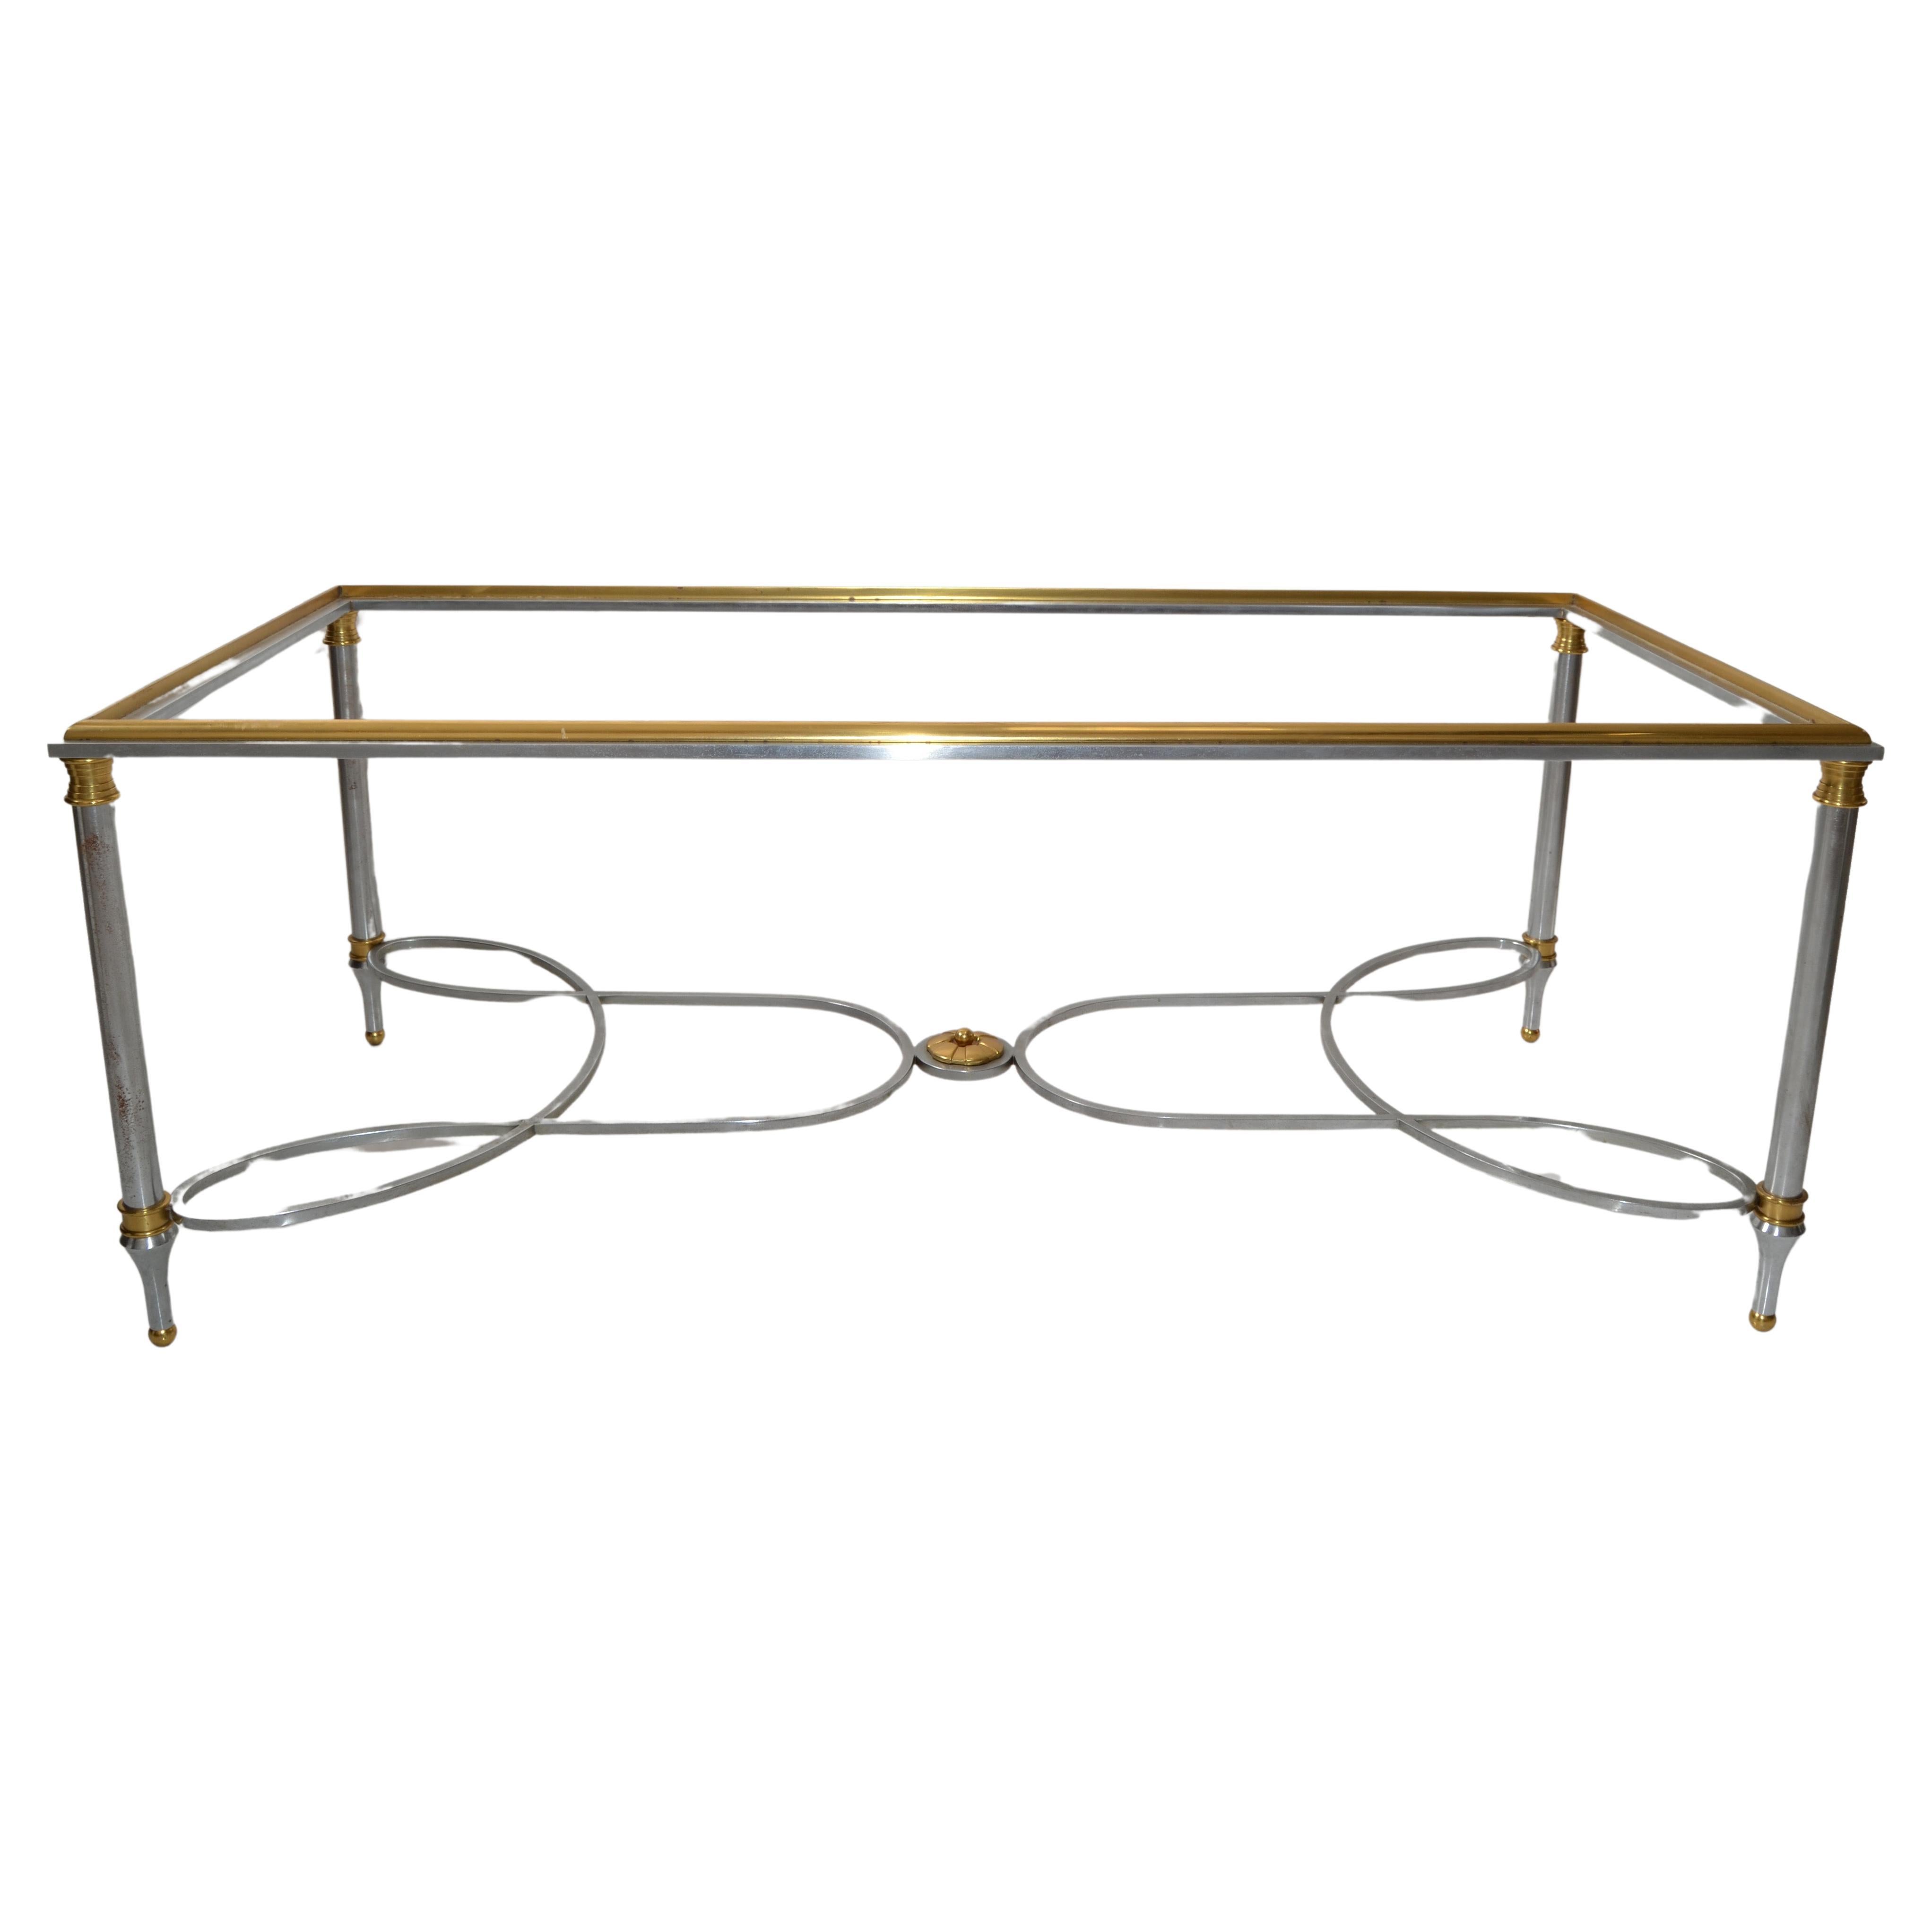 Mid-Century Modern Artisan French rectangle Coffee Table made of chromed steel, steel, brass and topped with an inserted clear Glass Shelf.
Crafted by iconic Parisian Workshop / Studio Maison Charles. 
In good condition, polished and Glass made